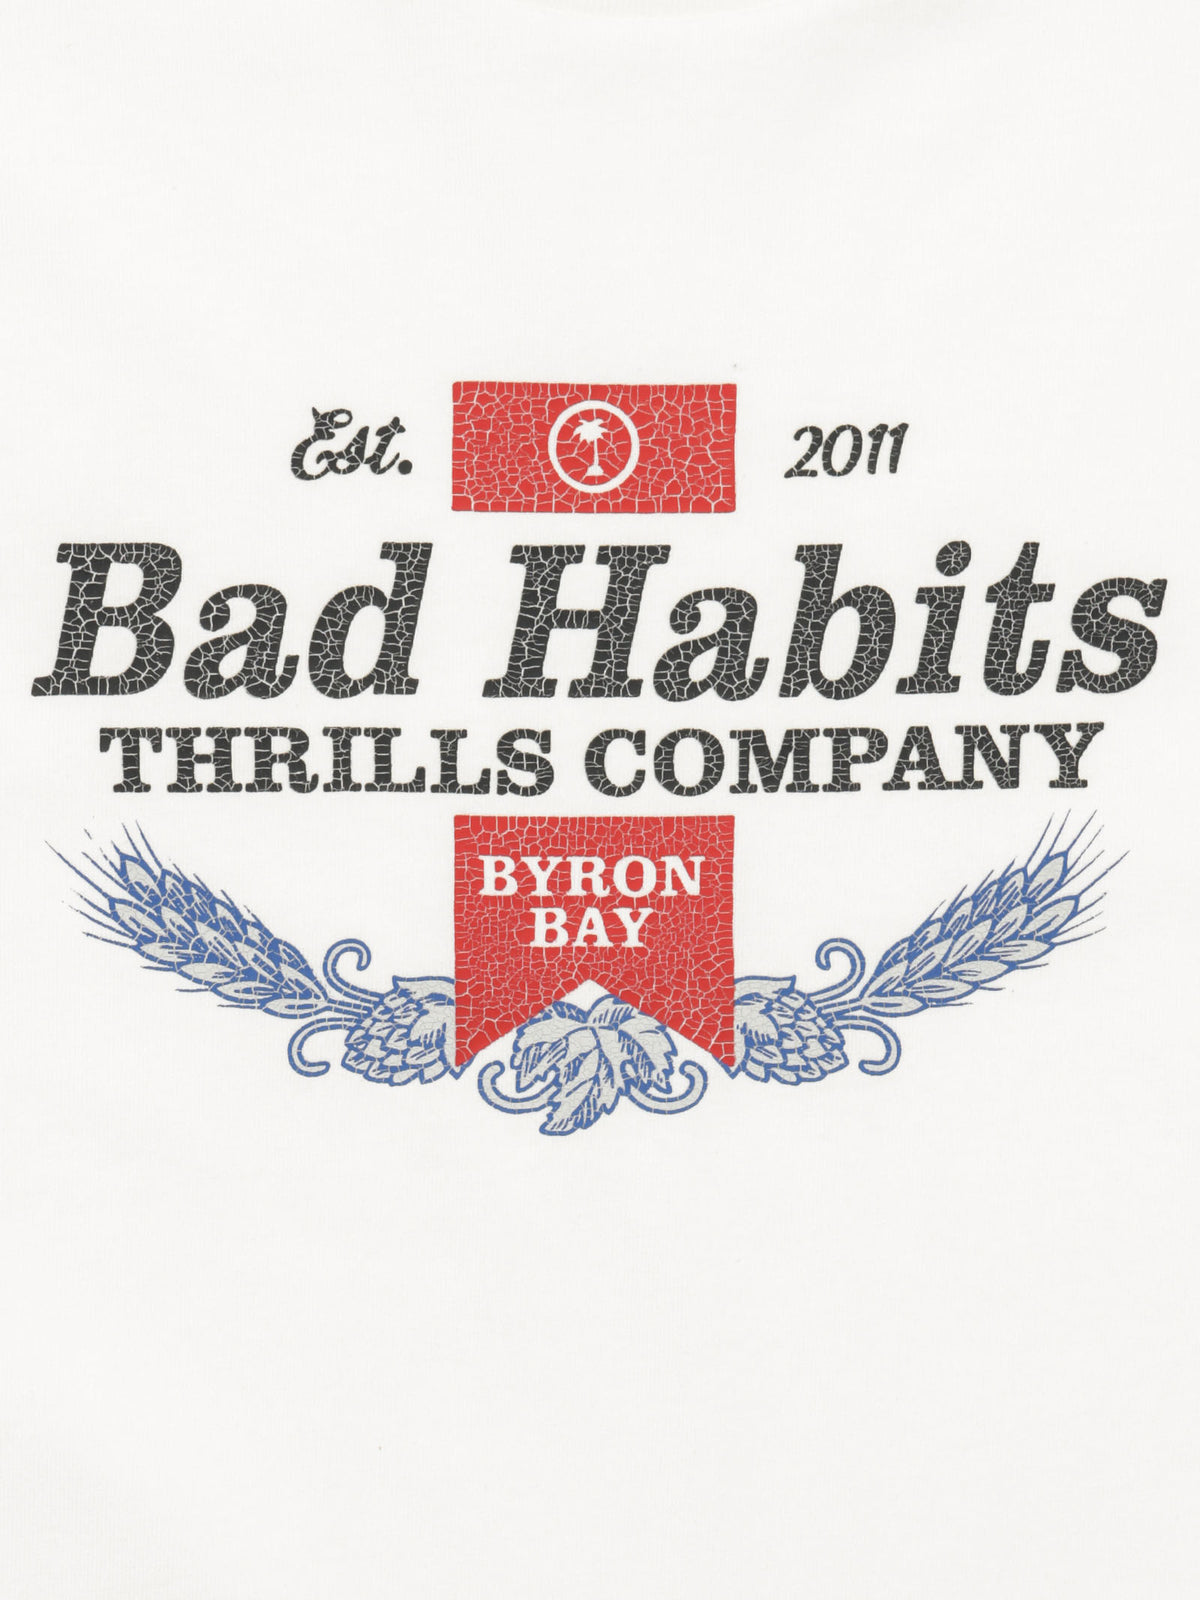 Bad Habits Merch T-Shirt in Dirty White